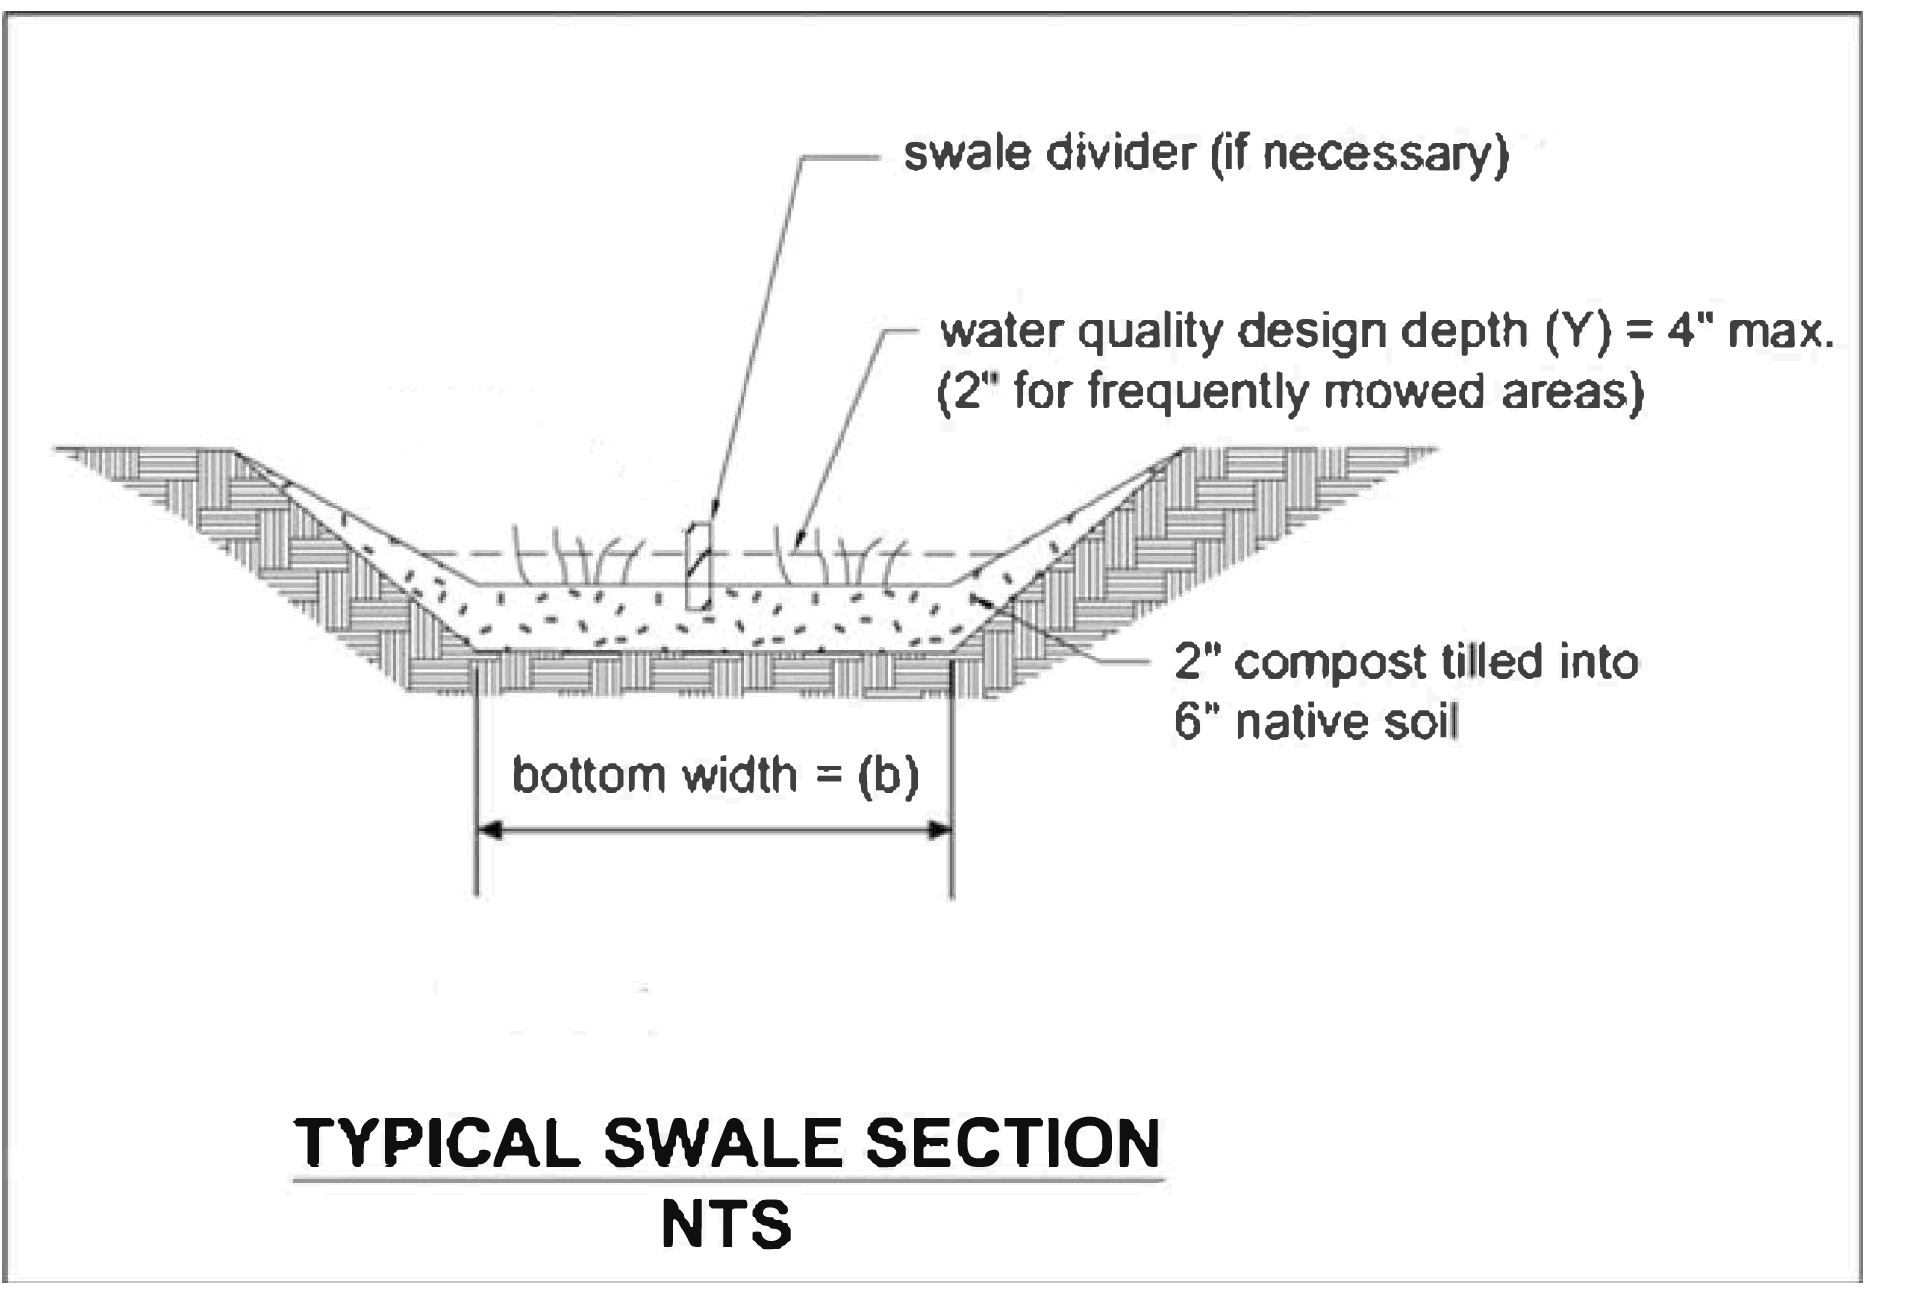 Figure 4-14 Typical Swale Section